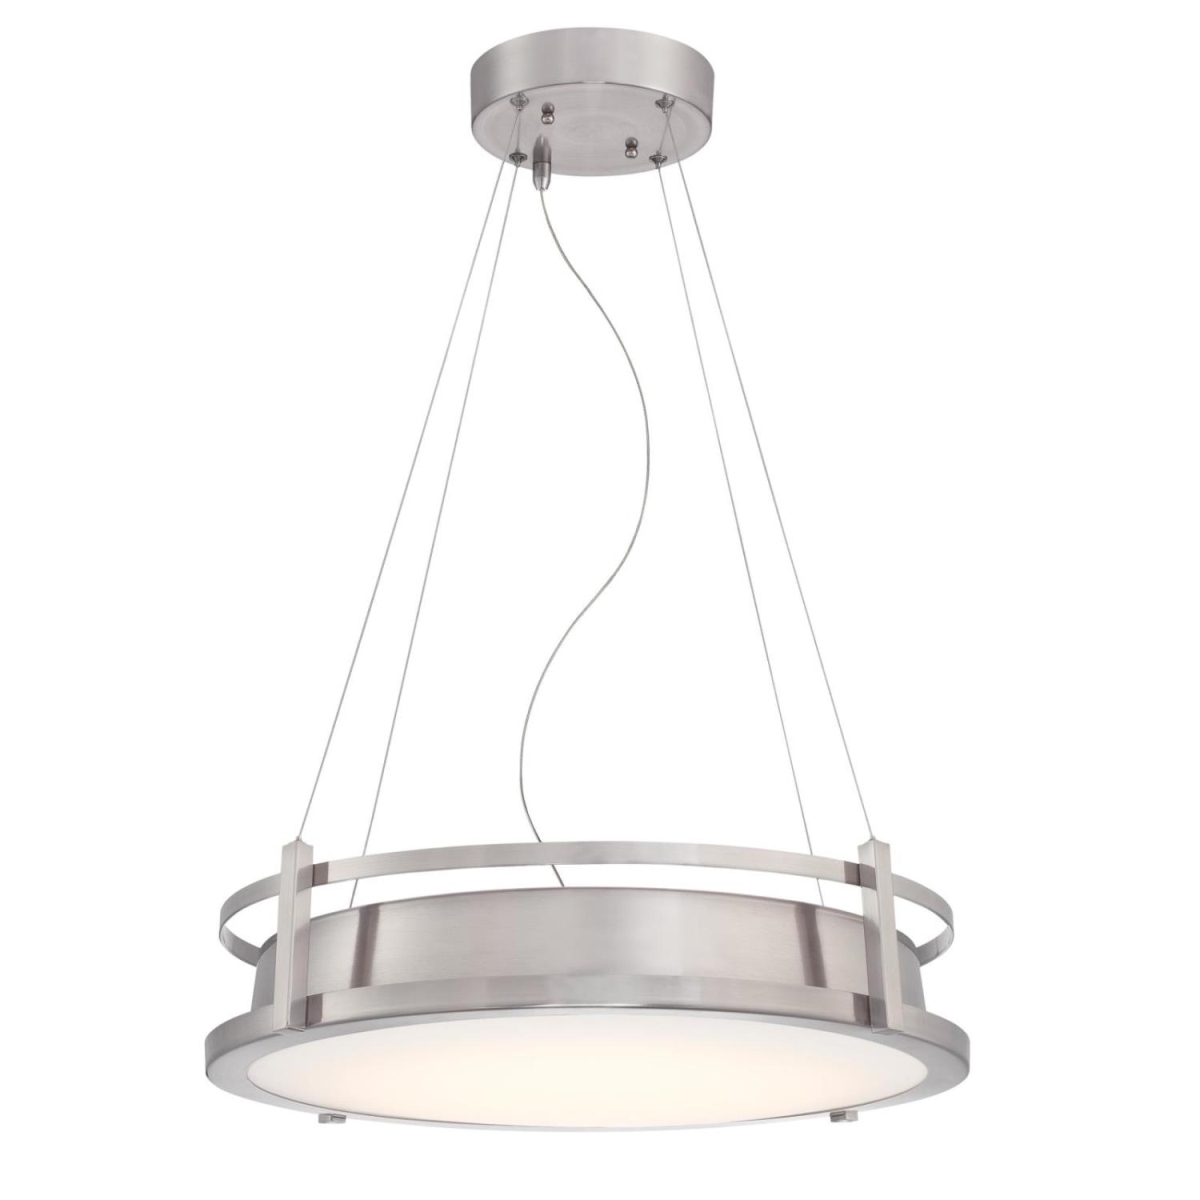 6372200 Led Chandelier With Frosted Lens - Brushed Nickel